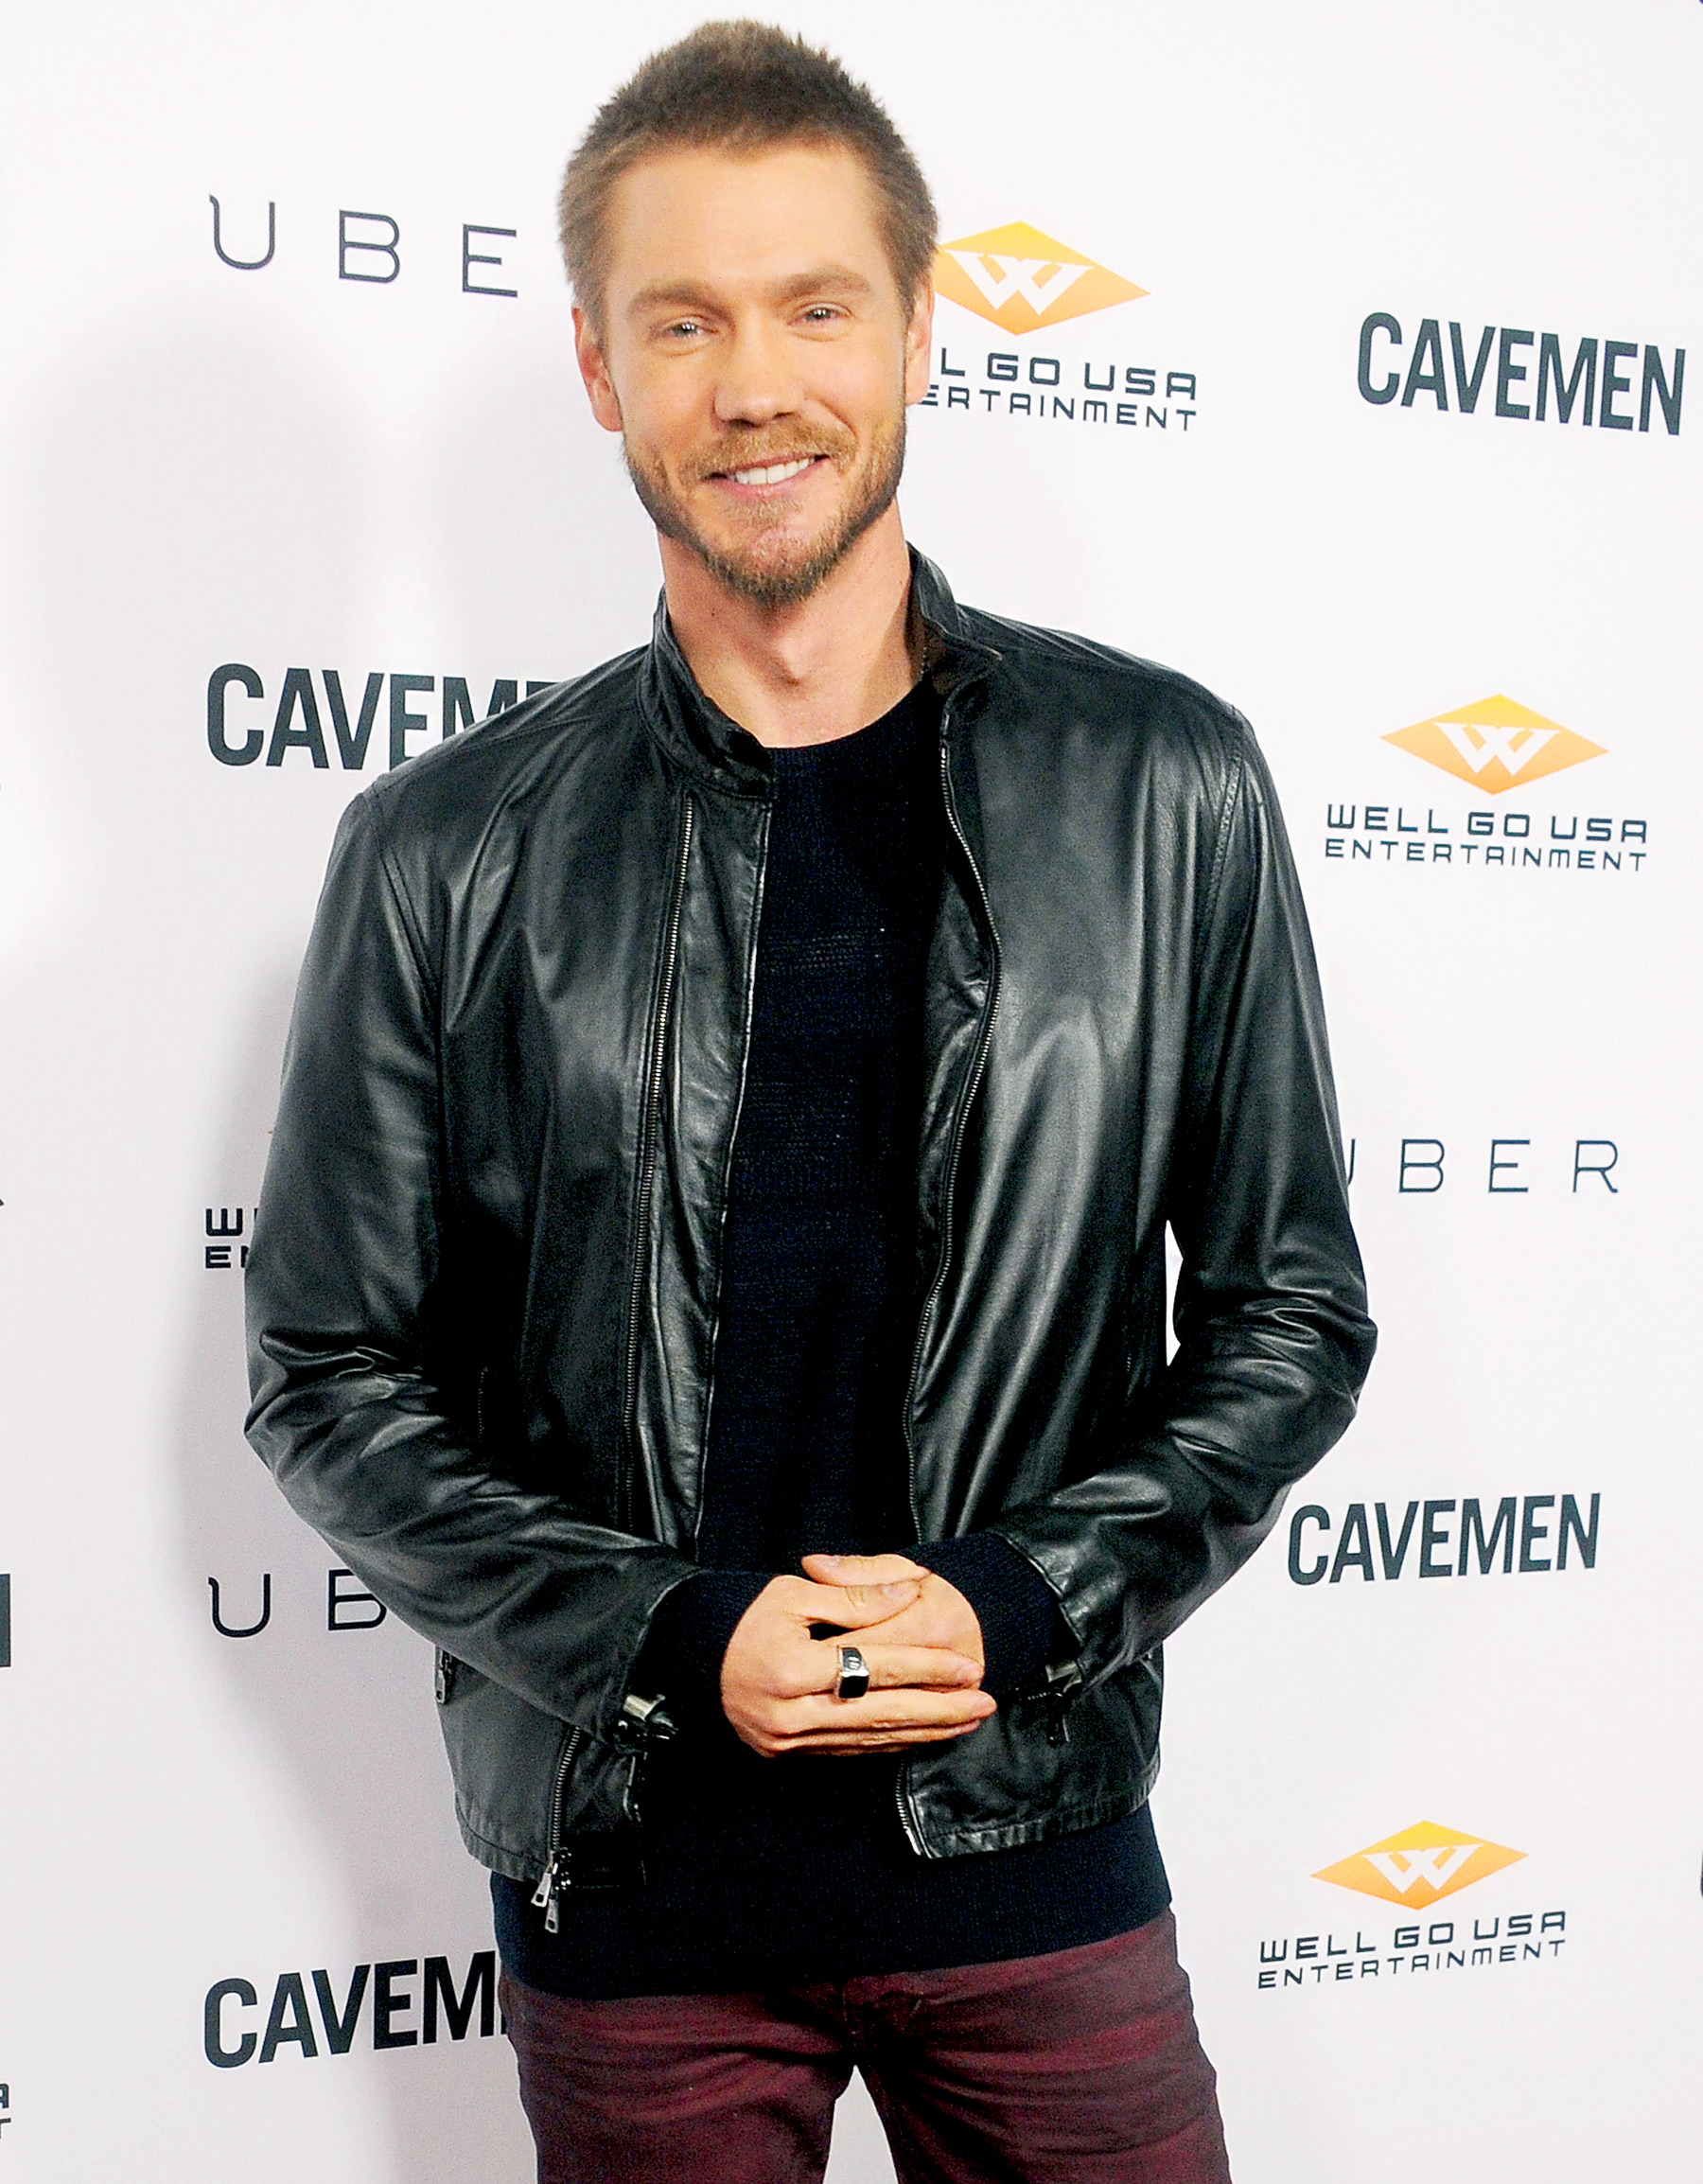 Chad Michael Murray Lost 25 Pounds to Play "Heroin Addict" in New Film